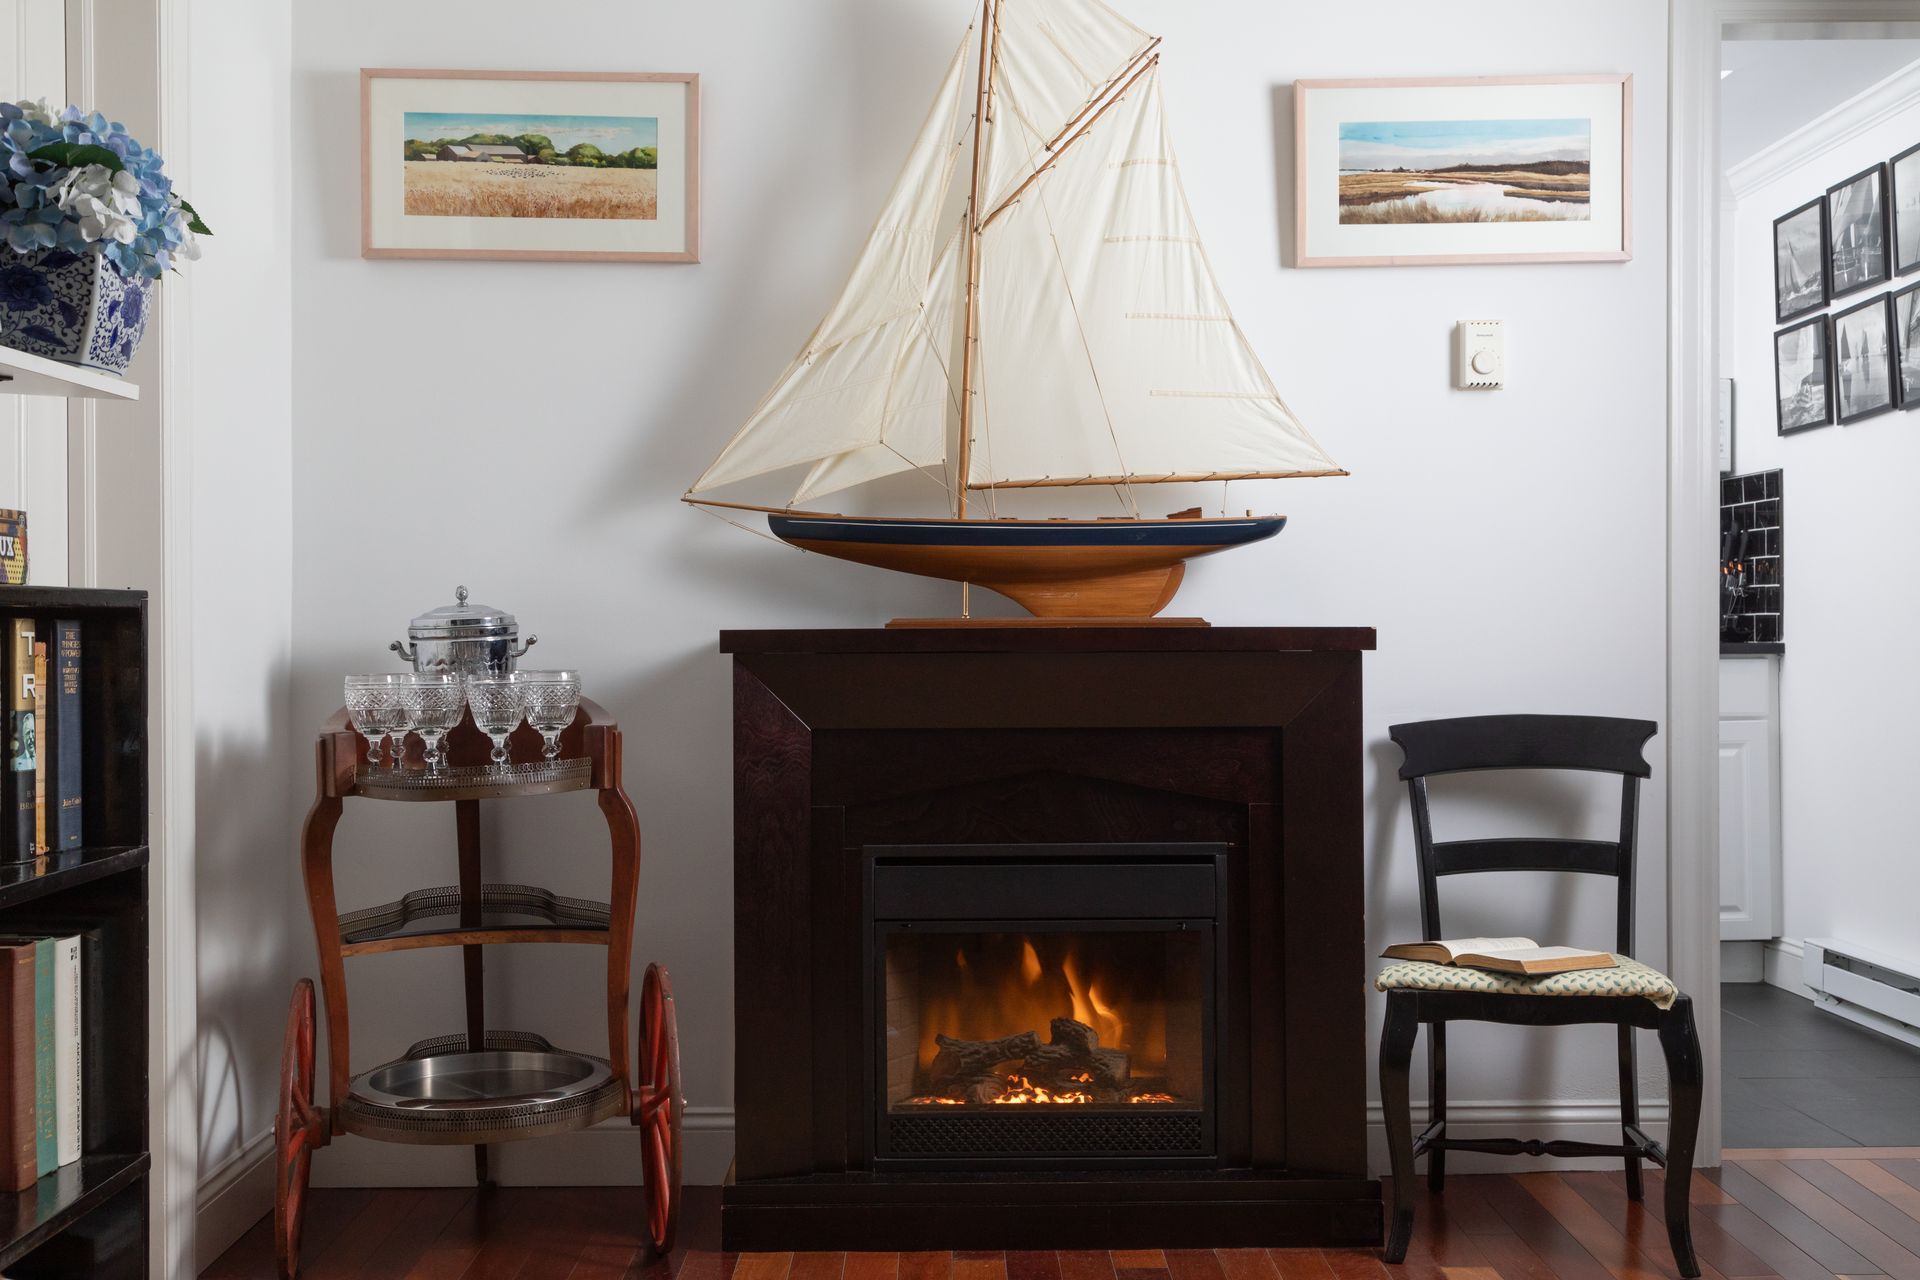 A living room with a fireplace and a sailboat on top of it